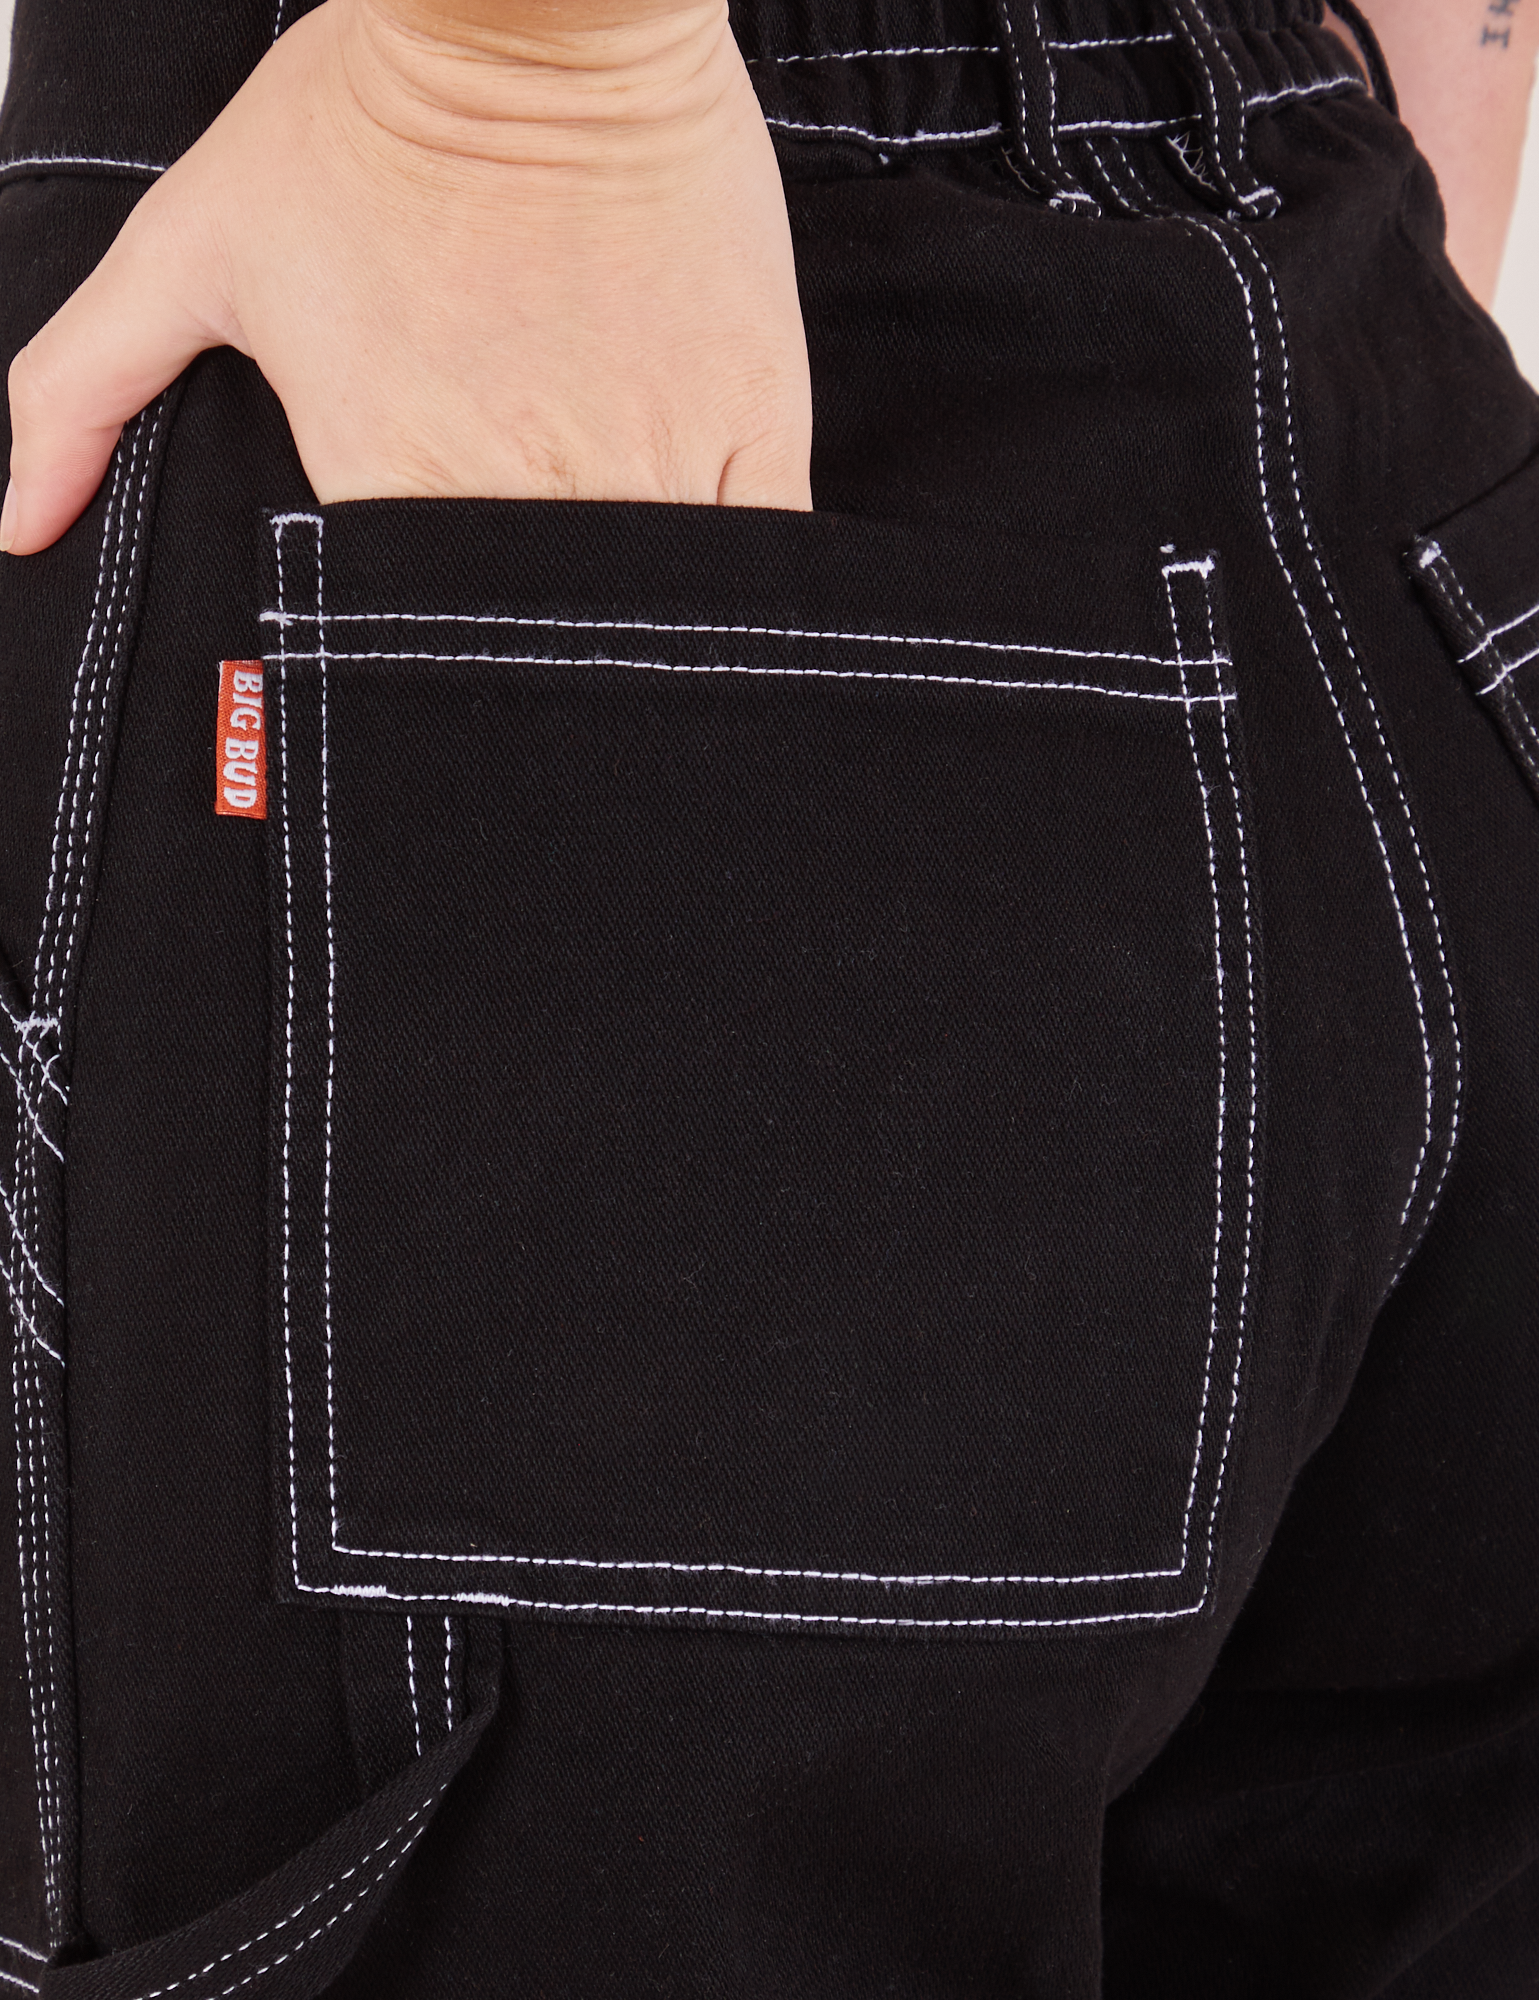 Back pocket close up of Carpenter Jeans in Black. Alex has her hand in the pocket. Pocket has a contrast white top stitching along the edges